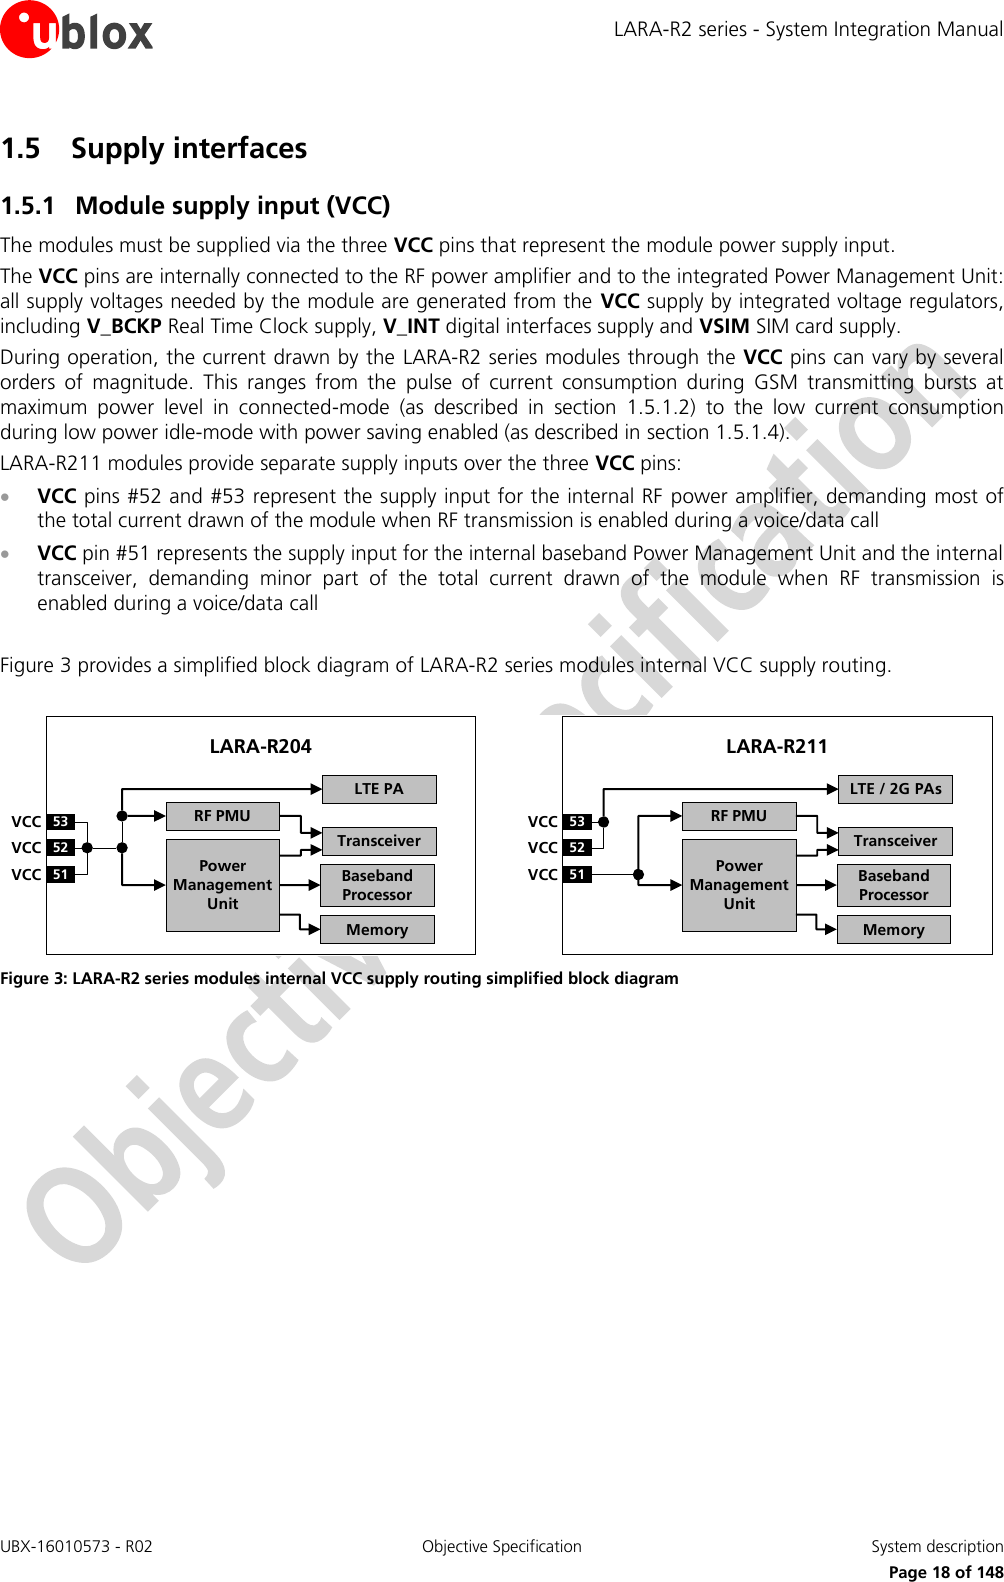 LARA-R2 series - System Integration Manual UBX-16010573 - R02  Objective Specification  System description     Page 18 of 148 1.5 Supply interfaces 1.5.1 Module supply input (VCC) The modules must be supplied via the three VCC pins that represent the module power supply input. The VCC pins are internally connected to the RF power amplifier and to the integrated Power Management Unit: all supply voltages needed by the module are generated from the  VCC supply by integrated voltage regulators, including V_BCKP Real Time Clock supply, V_INT digital interfaces supply and VSIM SIM card supply. During operation, the current drawn by the LARA-R2 series modules through the VCC pins can vary by several orders  of  magnitude.  This  ranges  from  the  pulse  of  current  consumption  during  GSM  transmitting  bursts  at maximum  power  level  in  connected-mode  (as  described  in  section  1.5.1.2)  to  the  low  current  consumption during low power idle-mode with power saving enabled (as described in section 1.5.1.4). LARA-R211 modules provide separate supply inputs over the three VCC pins:  VCC pins #52 and #53 represent the supply input for the internal RF  power amplifier, demanding most of the total current drawn of the module when RF transmission is enabled during a voice/data call  VCC pin #51 represents the supply input for the internal baseband Power Management Unit and the internal transceiver,  demanding  minor  part  of  the  total  current  drawn  of  the  module  when  RF  transmission  is enabled during a voice/data call  Figure 3 provides a simplified block diagram of LARA-R2 series modules internal VCC supply routing.  53VCC52VCC51VCCLARA-R204Power ManagementUnitMemoryBaseband ProcessorTransceiverRF PMULTE PA53VCC52VCC51VCCLARA-R211Power ManagementUnitMemoryBaseband ProcessorTransceiverRF PMULTE / 2G PAs Figure 3: LARA-R2 series modules internal VCC supply routing simplified block diagram   